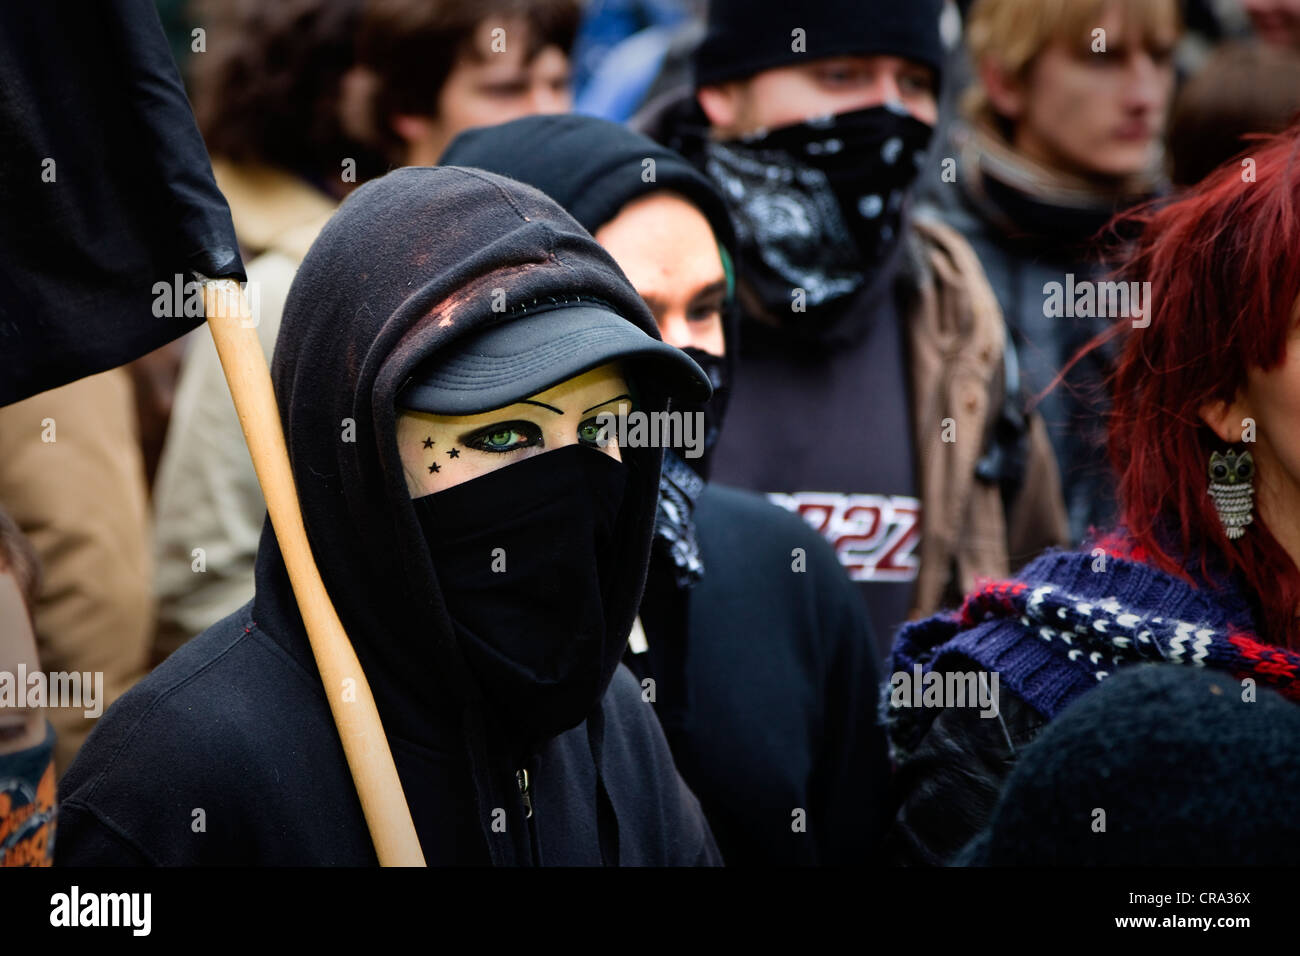 Demonstrator with a black flag and face covered up, at a street demonstration Glasgow, Scotland, UK Stock Photo